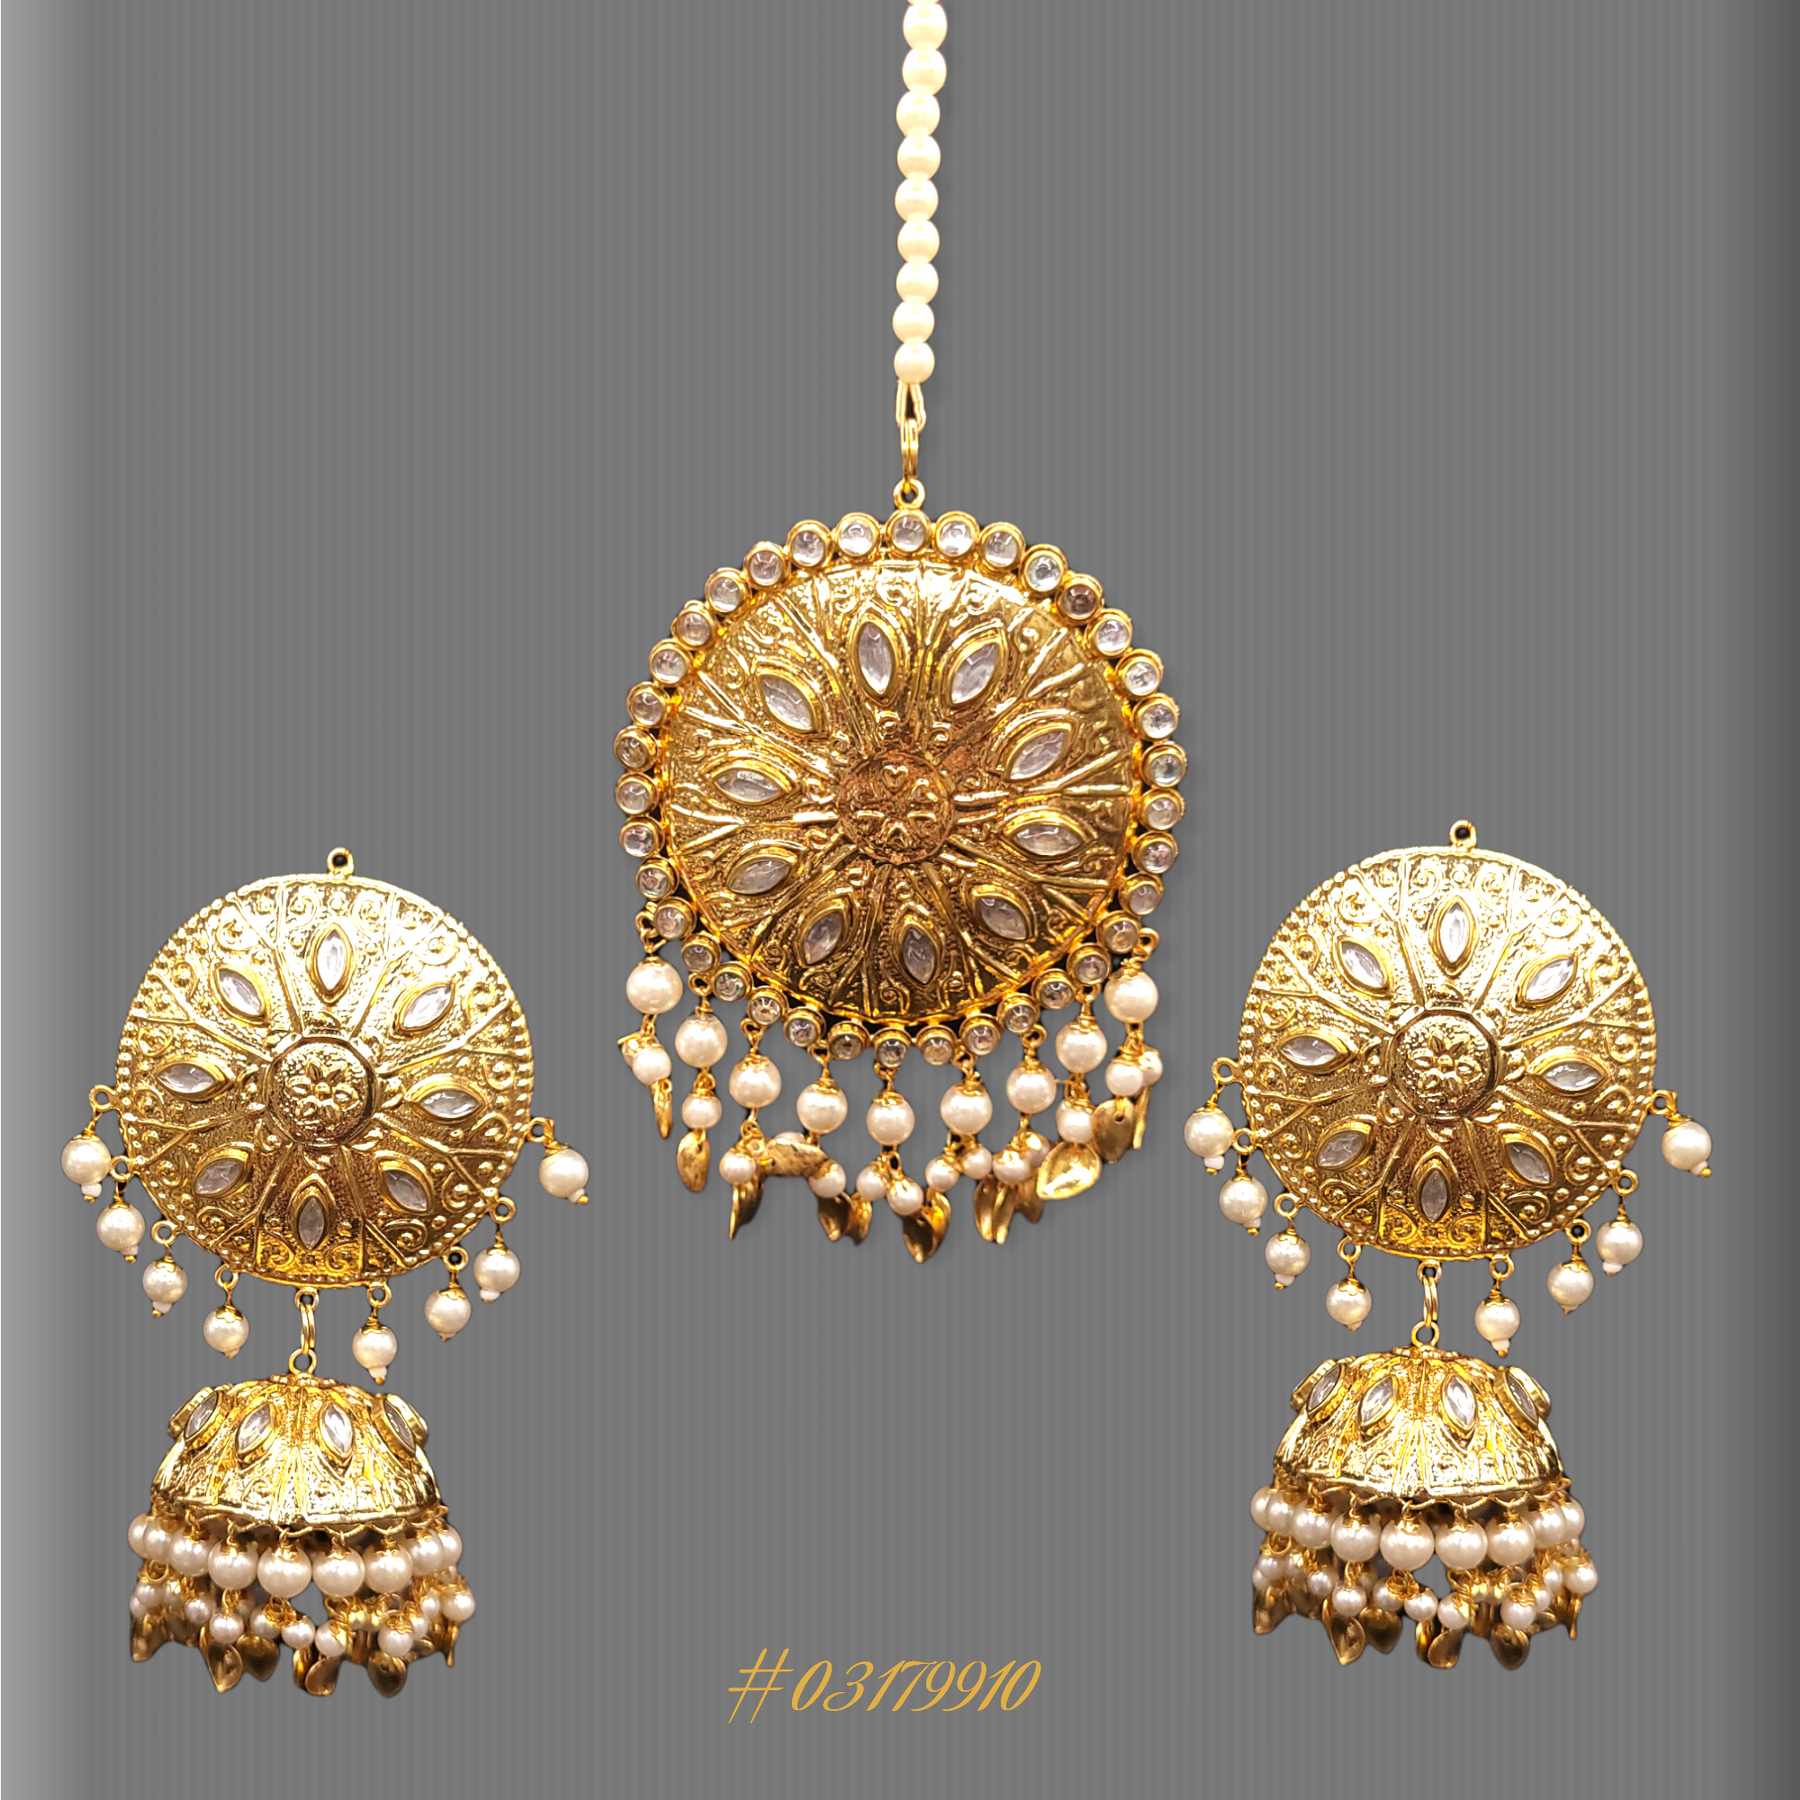 STUNNING EARRINGS WITH MAANG TIKKA (HEAD PIECE), IN WHITE & GOLD TONE